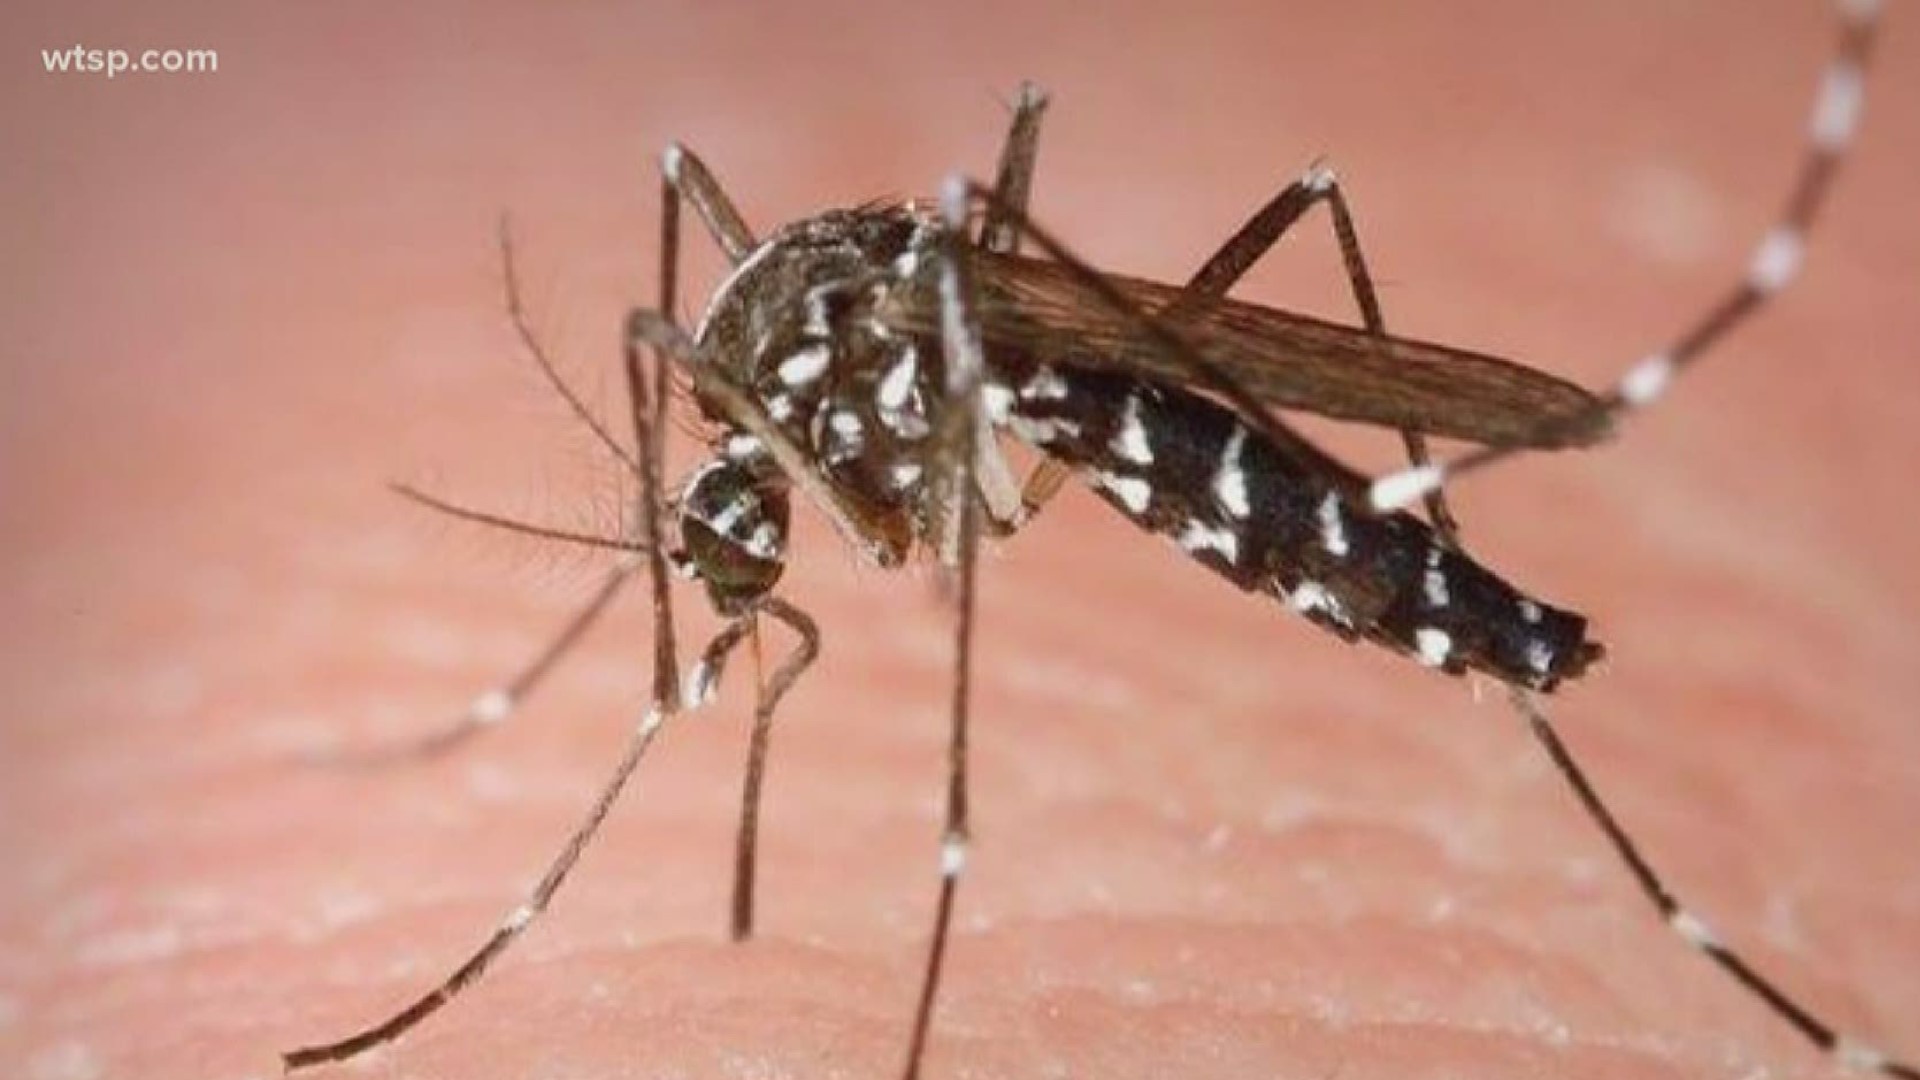 Hillsborough mosquito control says we’ve been seeing a lot of one particularly nasty species called Mansonia Titillans.